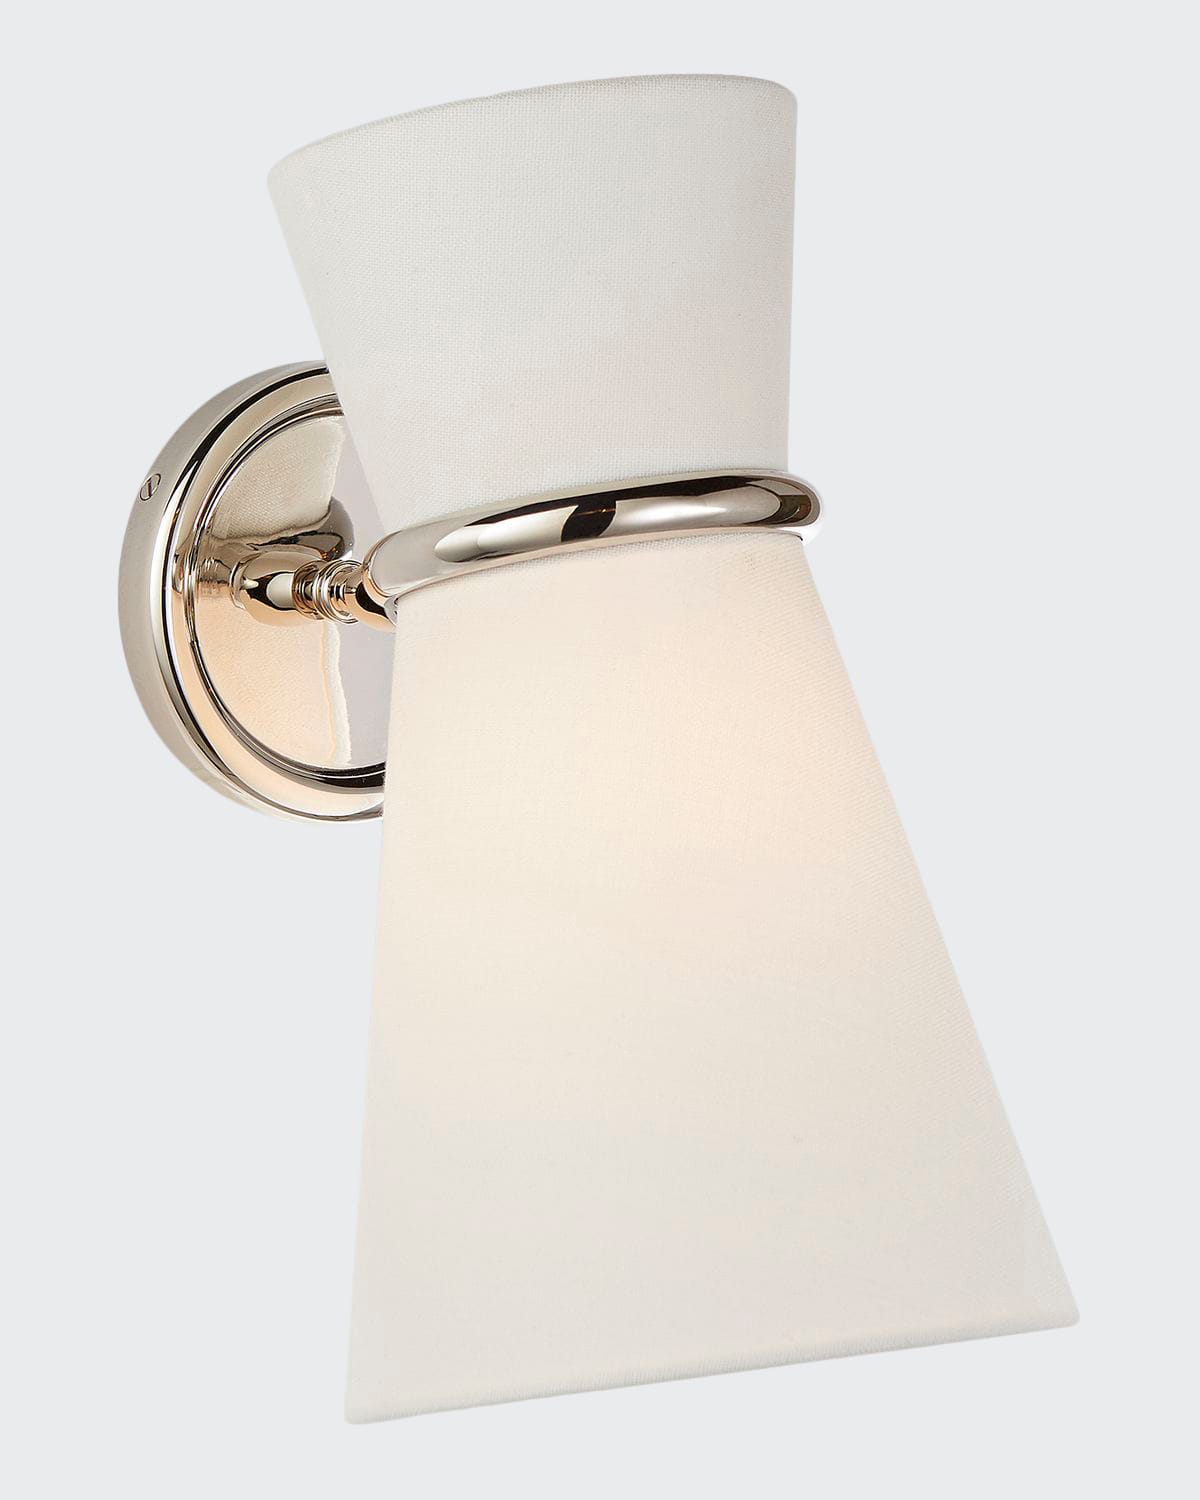 Aerin Clarkson Small Single Pivoting Sconce Light In Silver